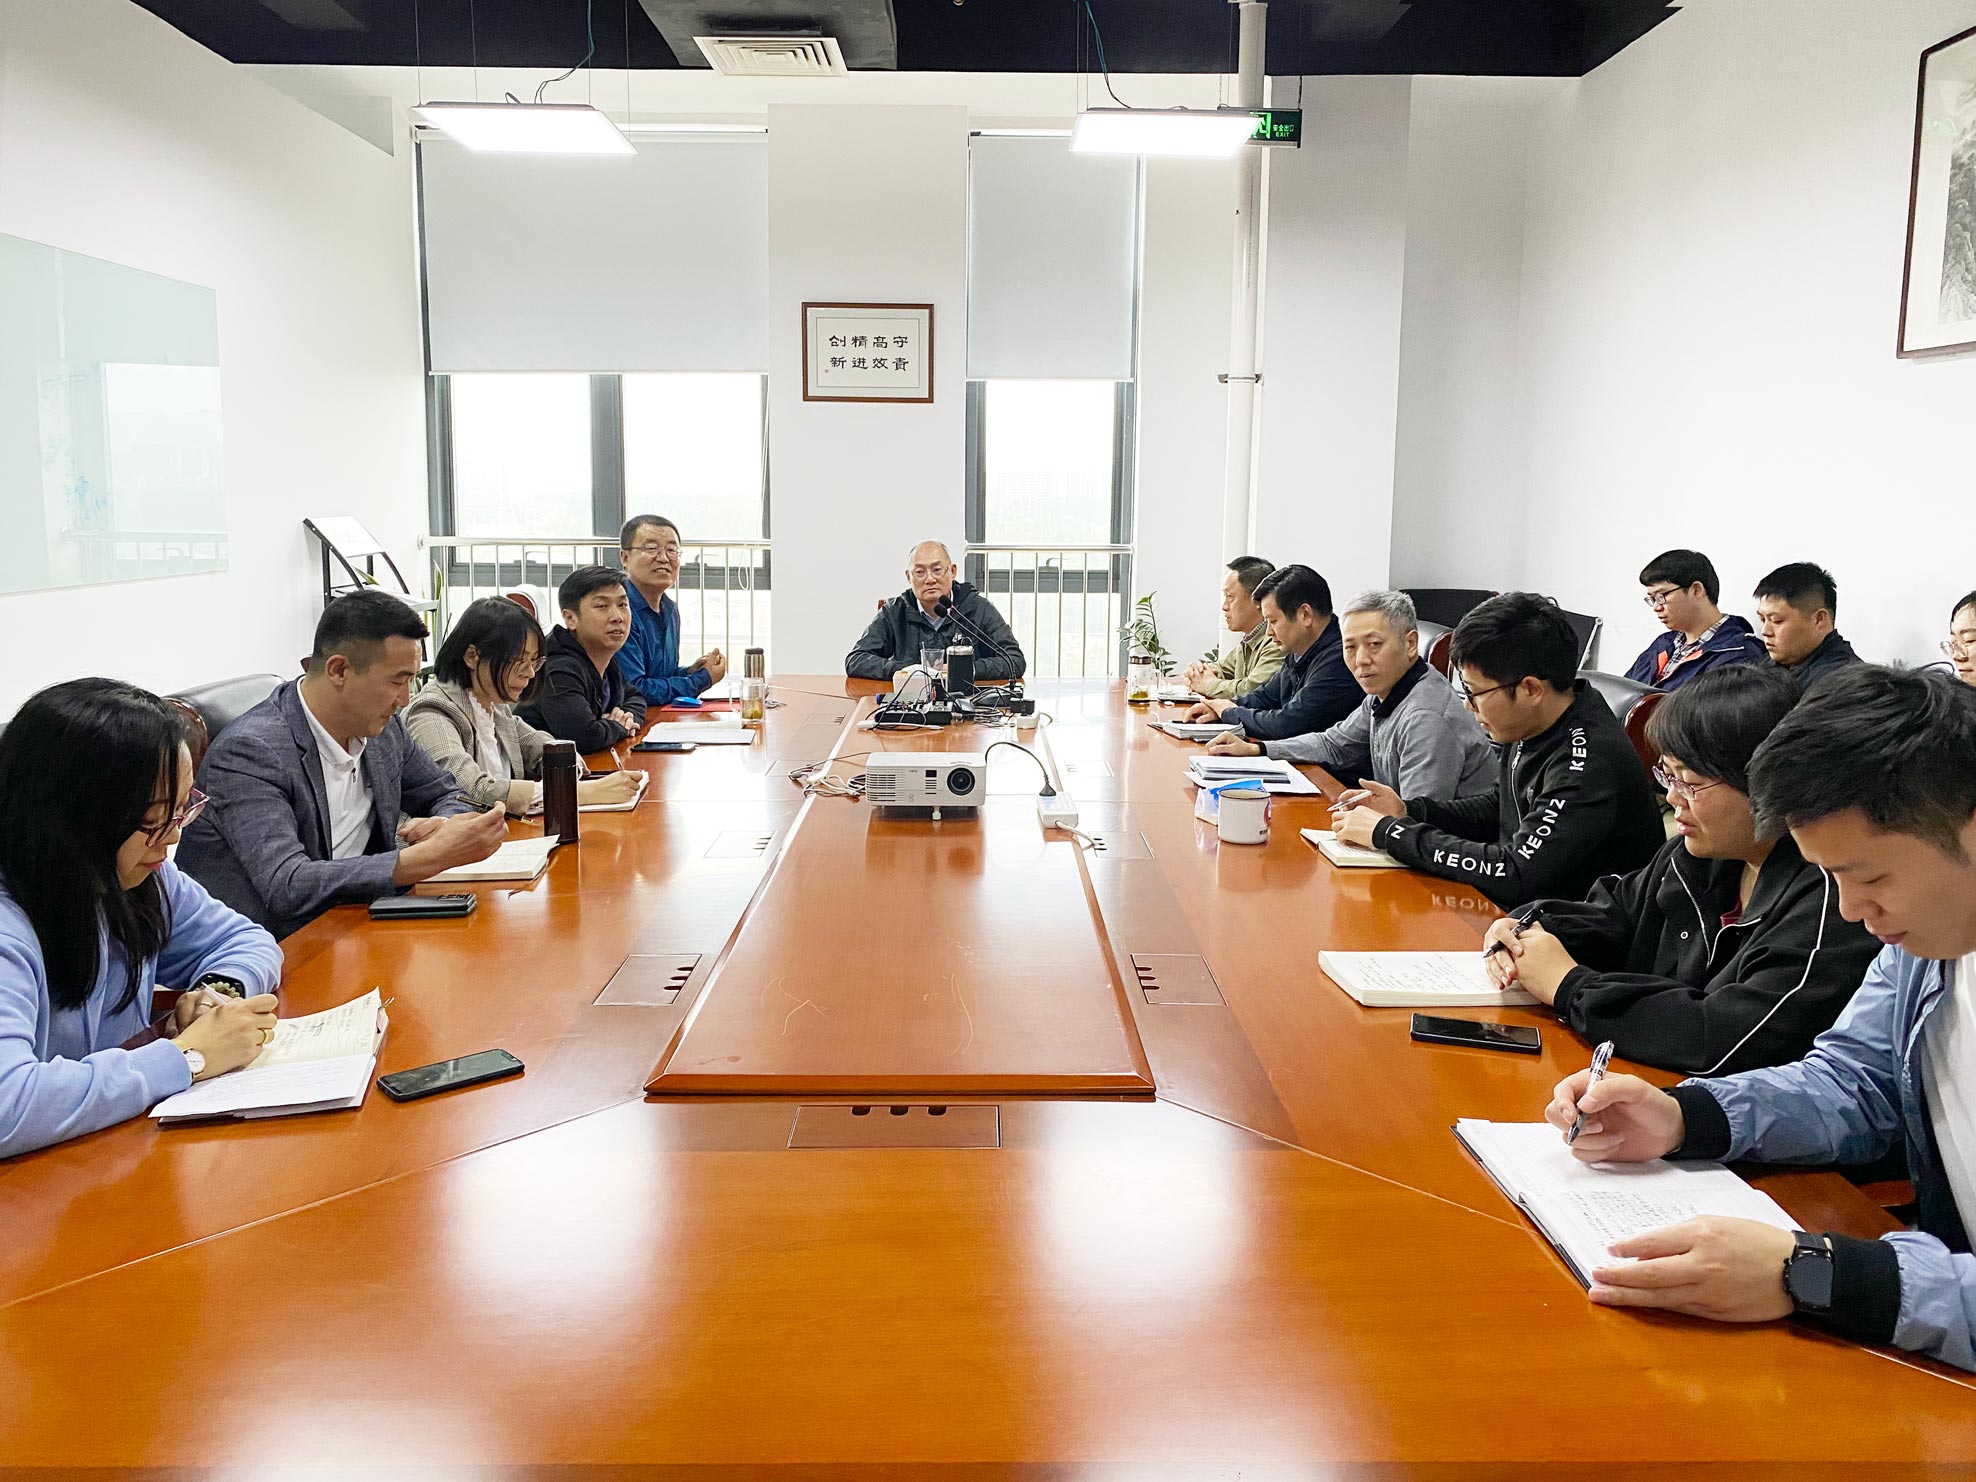 Kcalin Thermal Operation Division held a work promotion meeting